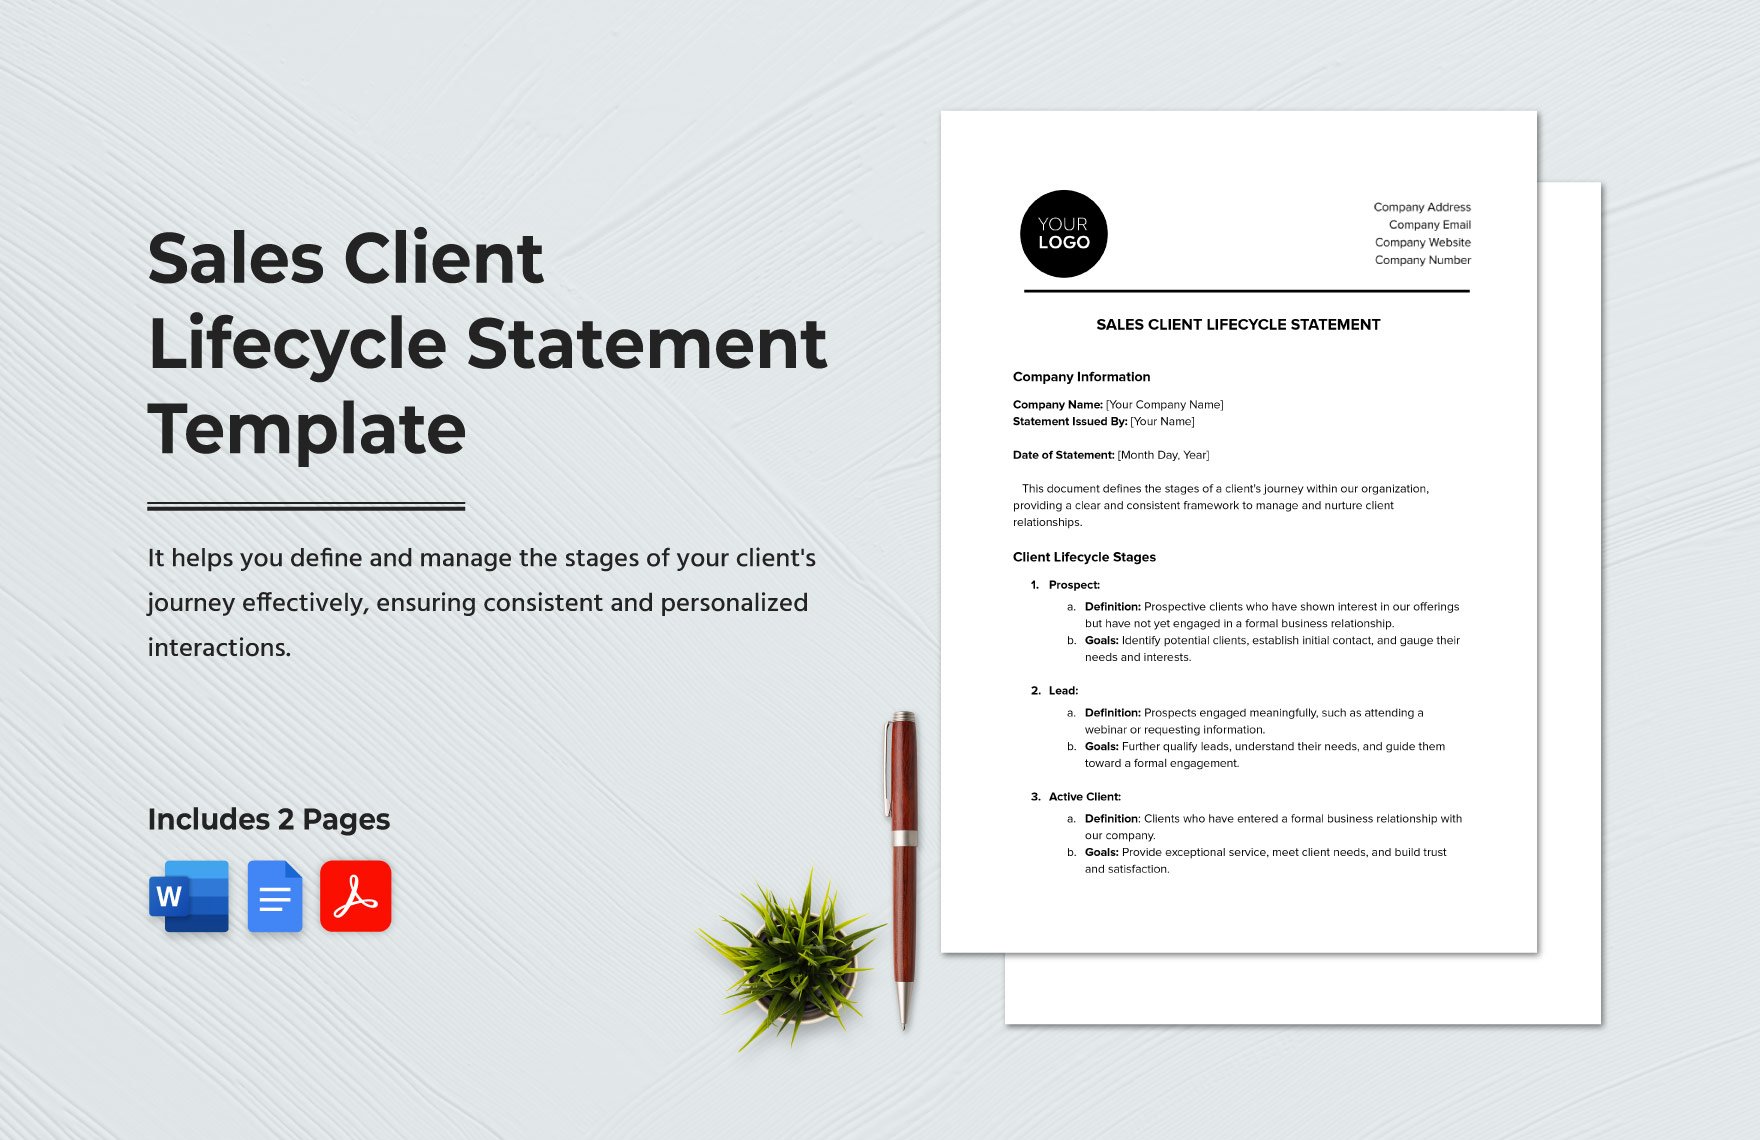 Sales Client Lifecycle Statement Template